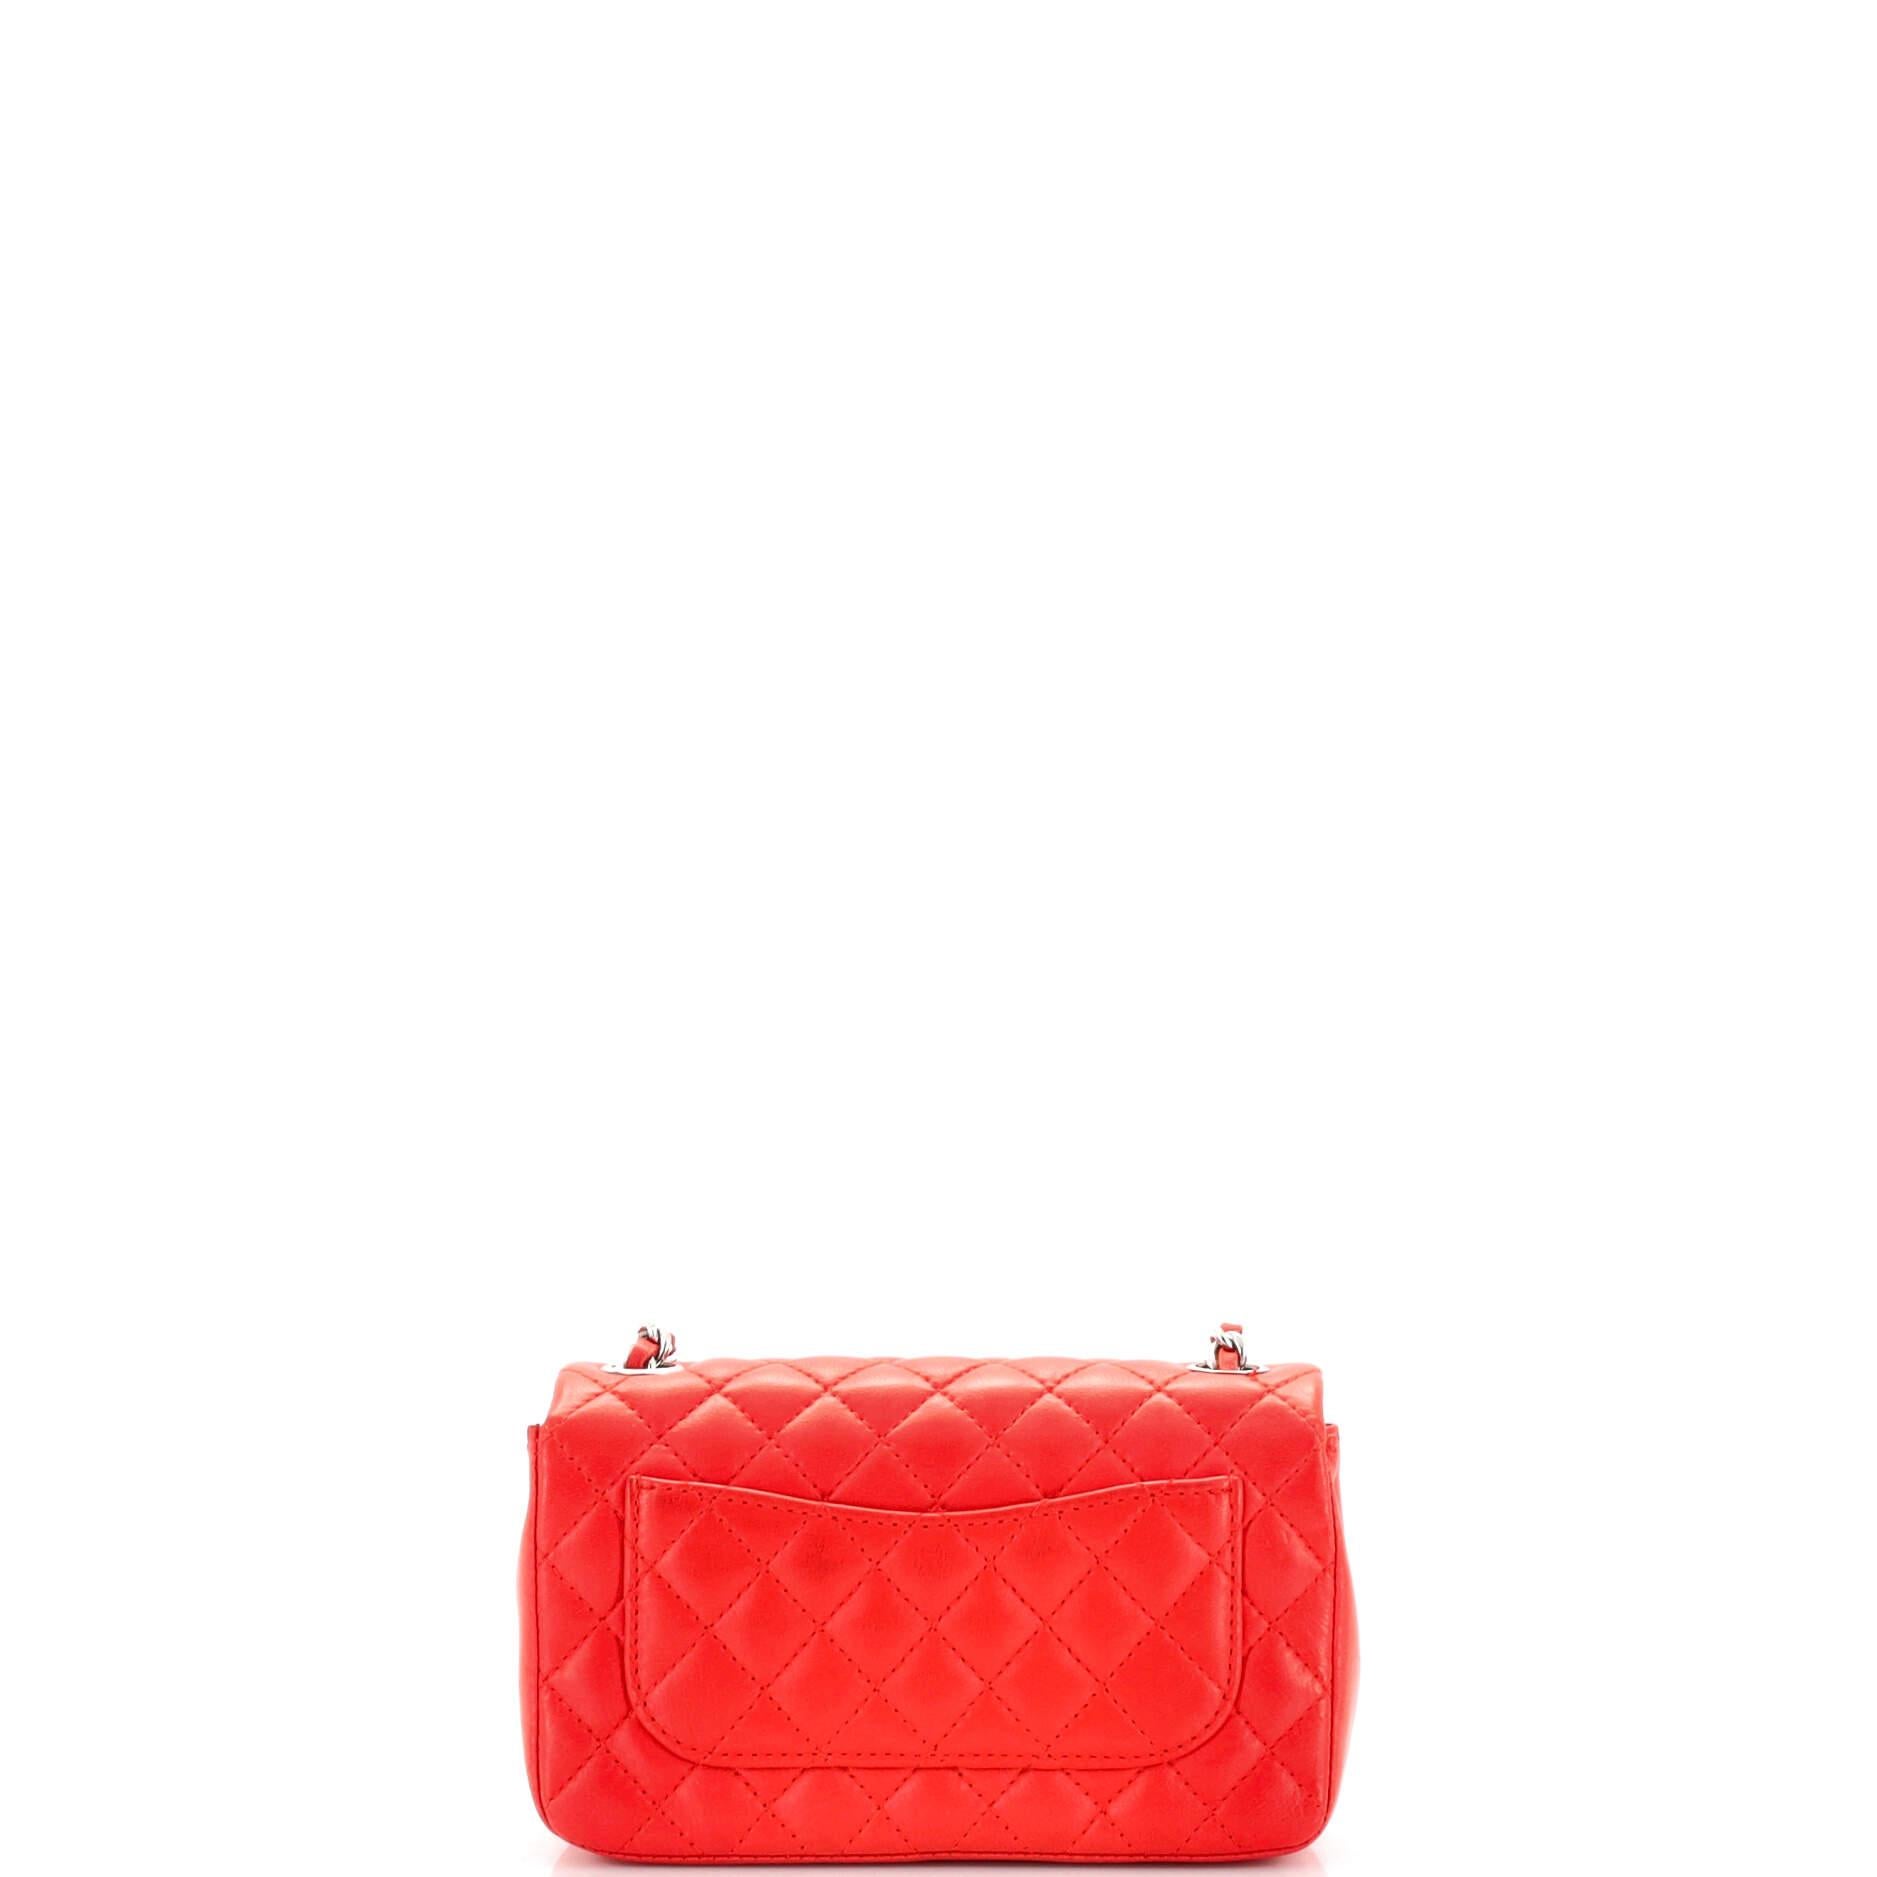 Chanel Vintage Ladybug Flap Bag Quilted Lambskin Mini In Good Condition In NY, NY